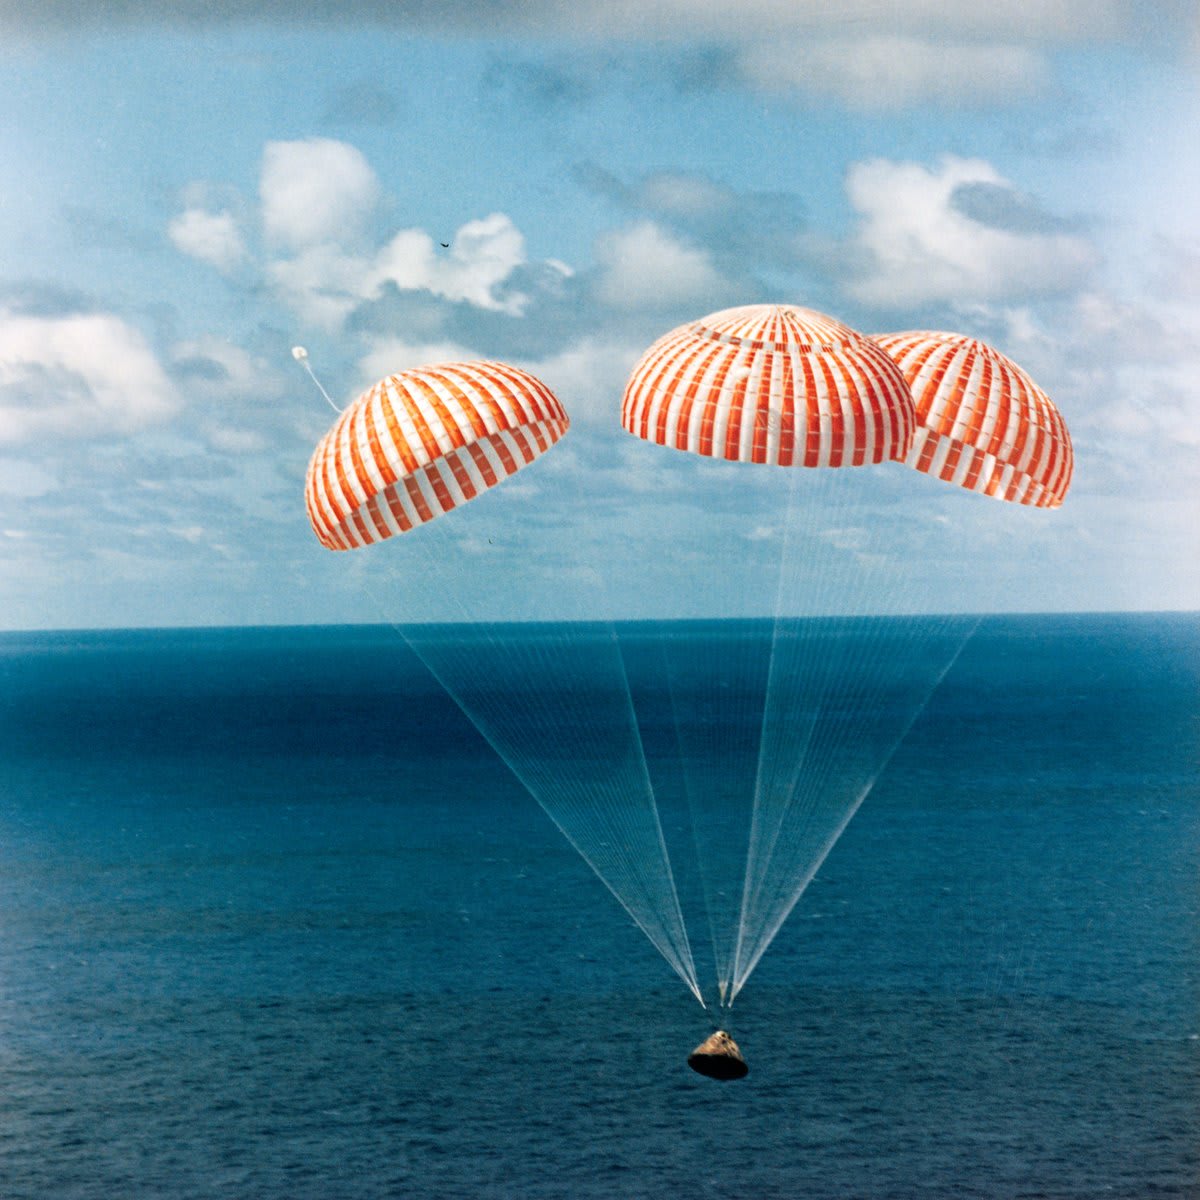 50 years ago right now, the Apollo 14 mission came to an end when command module “Kitty Hawk” splashed down in the South Pacific Ocean approximately 765 nautical miles south of American Samoa.